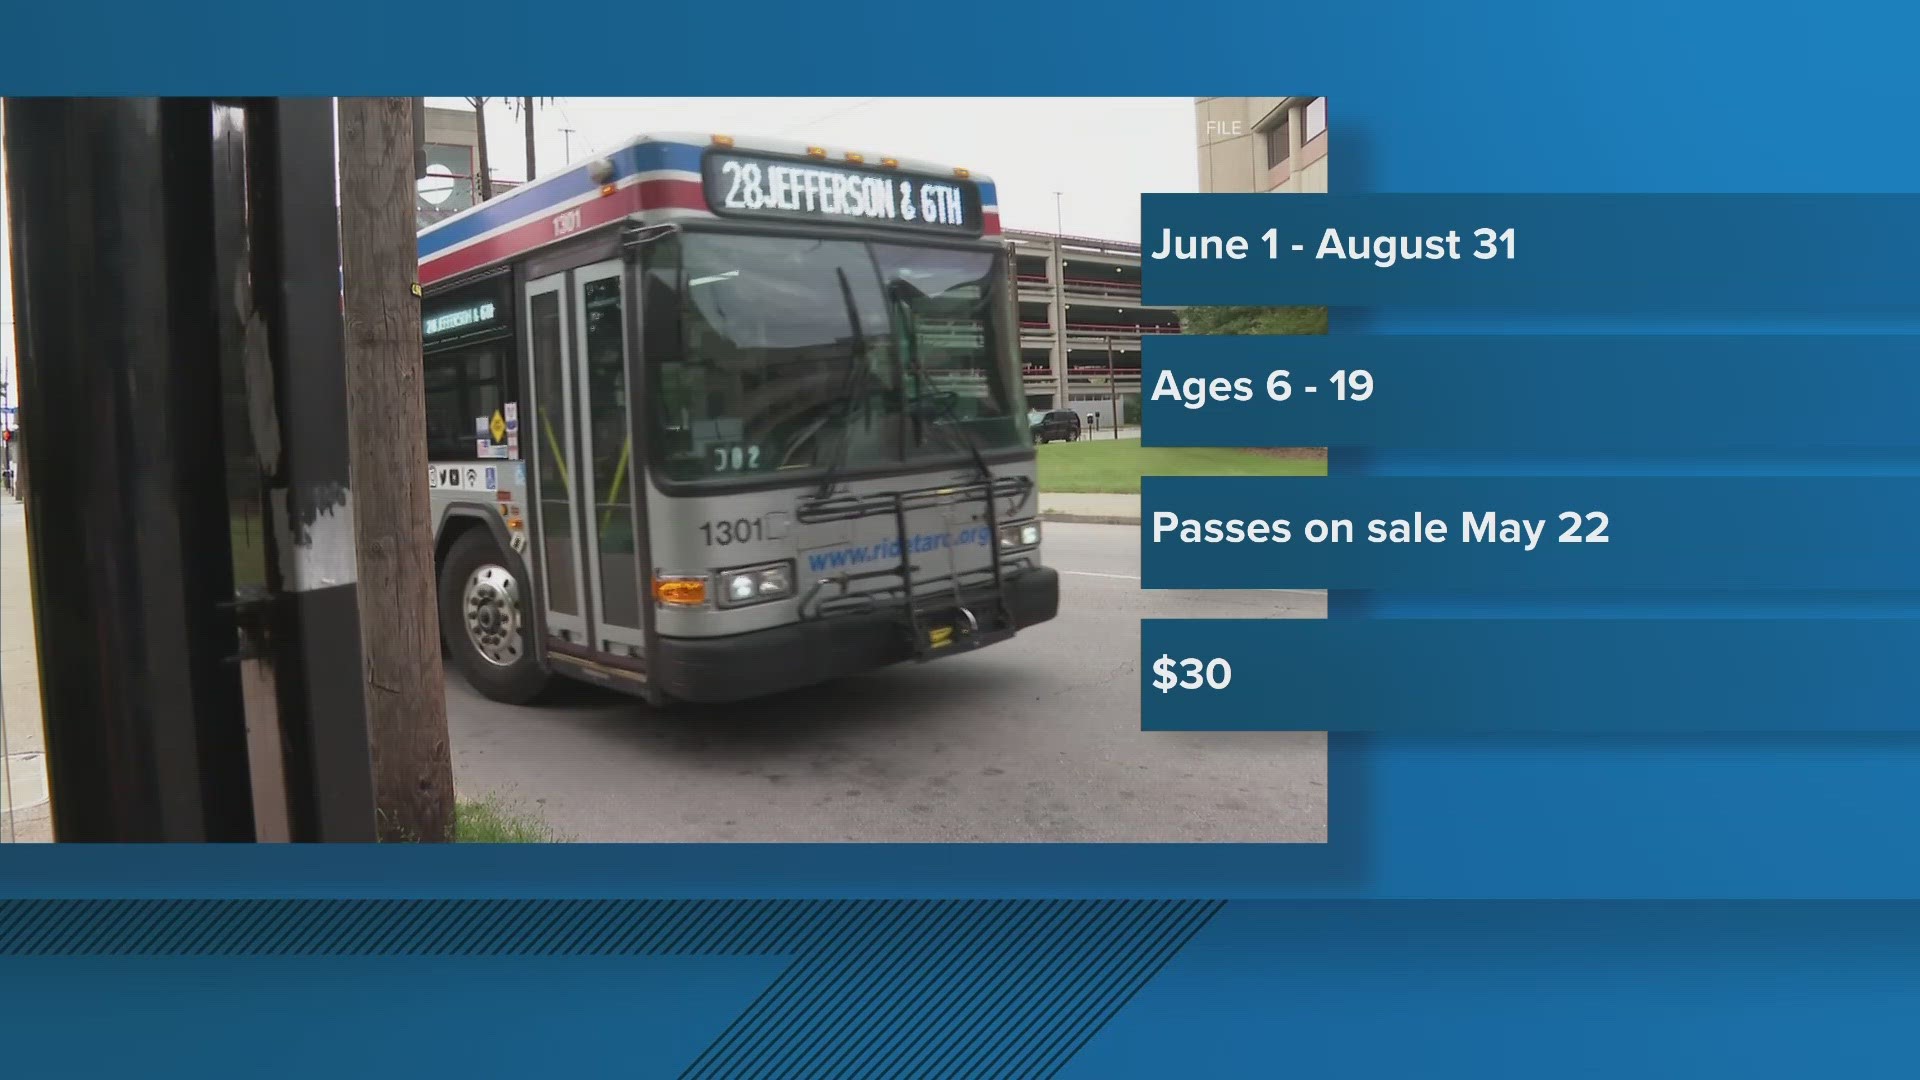 With the pass, young people ages 6 through 19 can utilize unlimited travel through TARC.